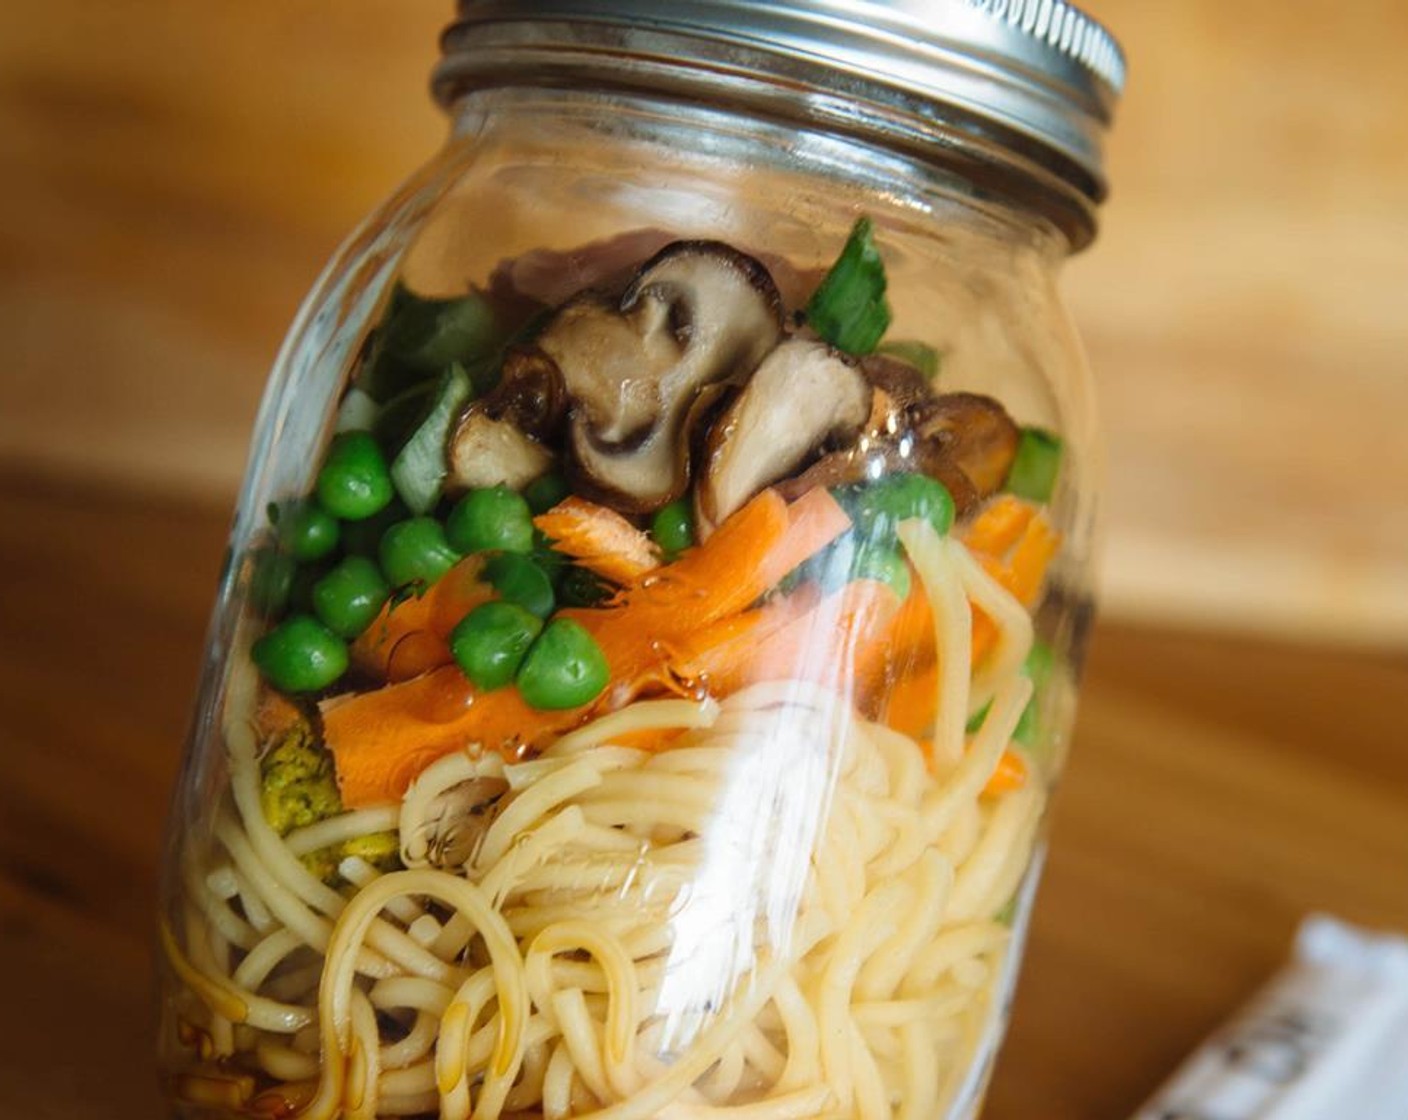 step 7 You can make several noodle jars and keep them in the fridge for a quick and healthy lunch or snack for work.